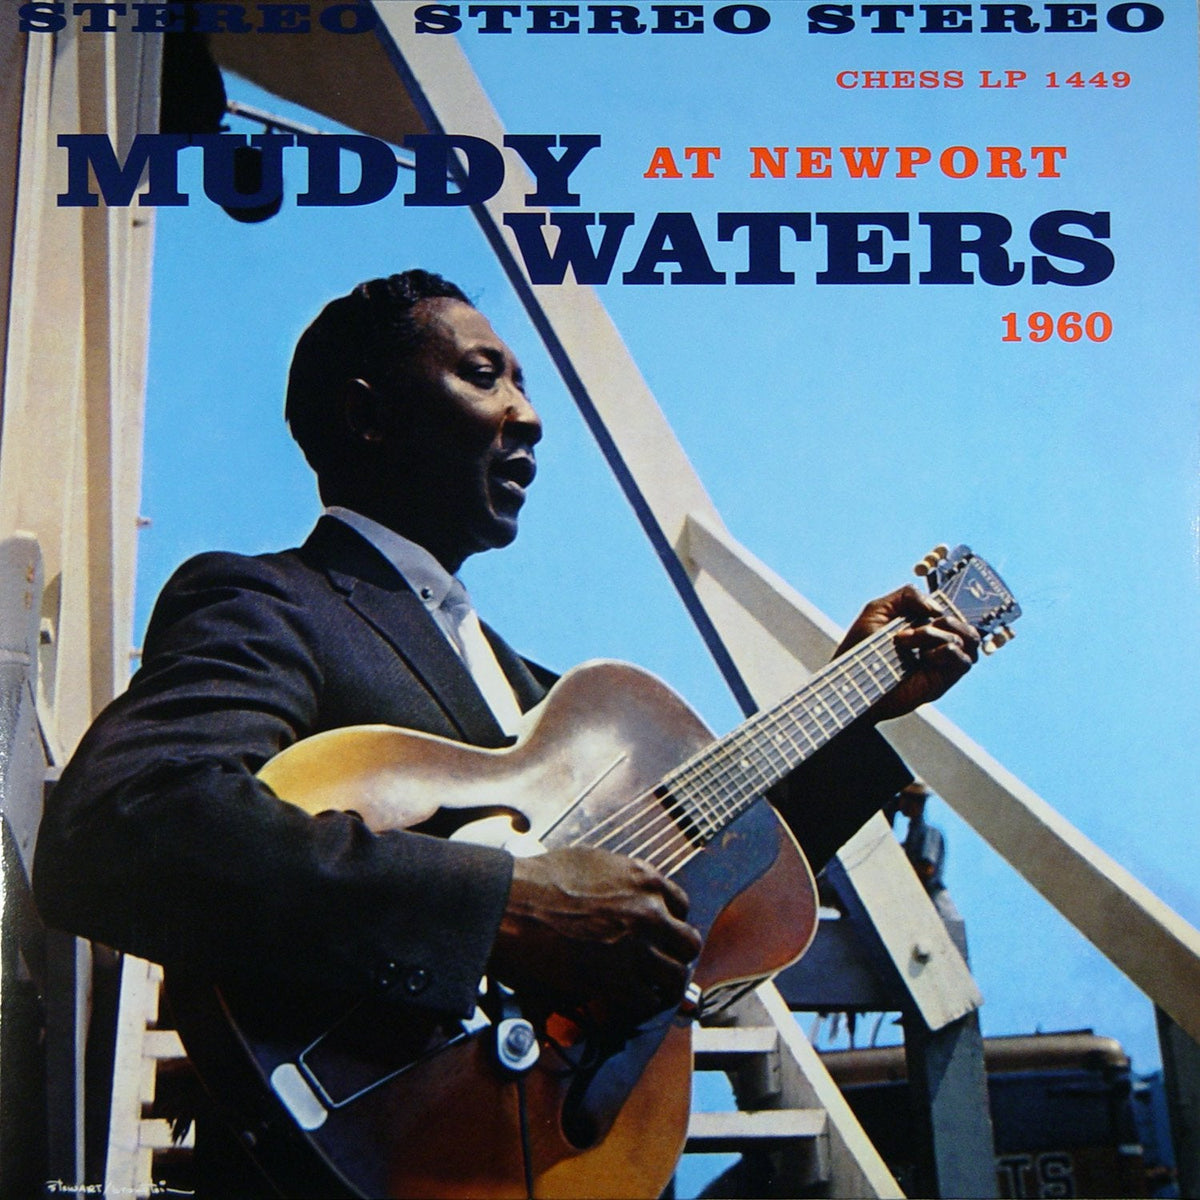 Everything You Need To Know About Our Muddy Waters Reissue